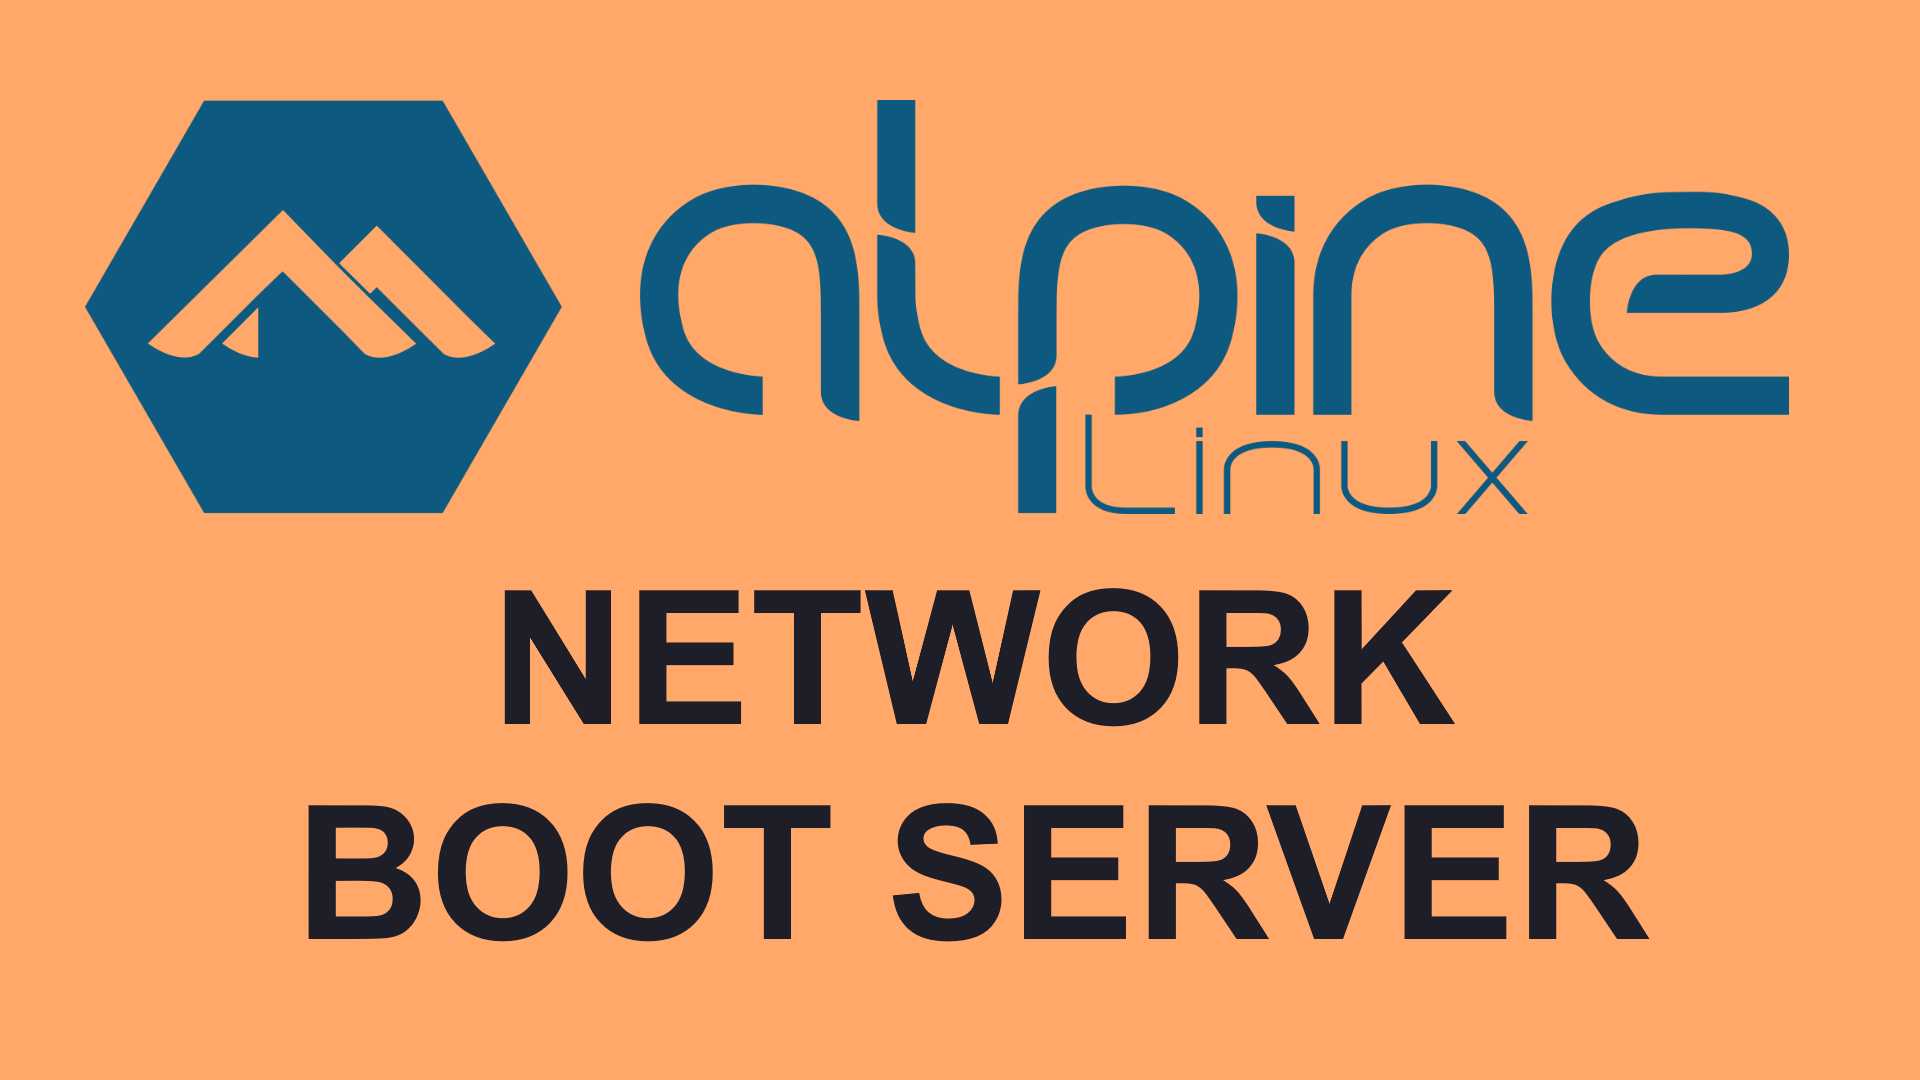 Setting up a Netboot (PXE) Server for Alpine Linux